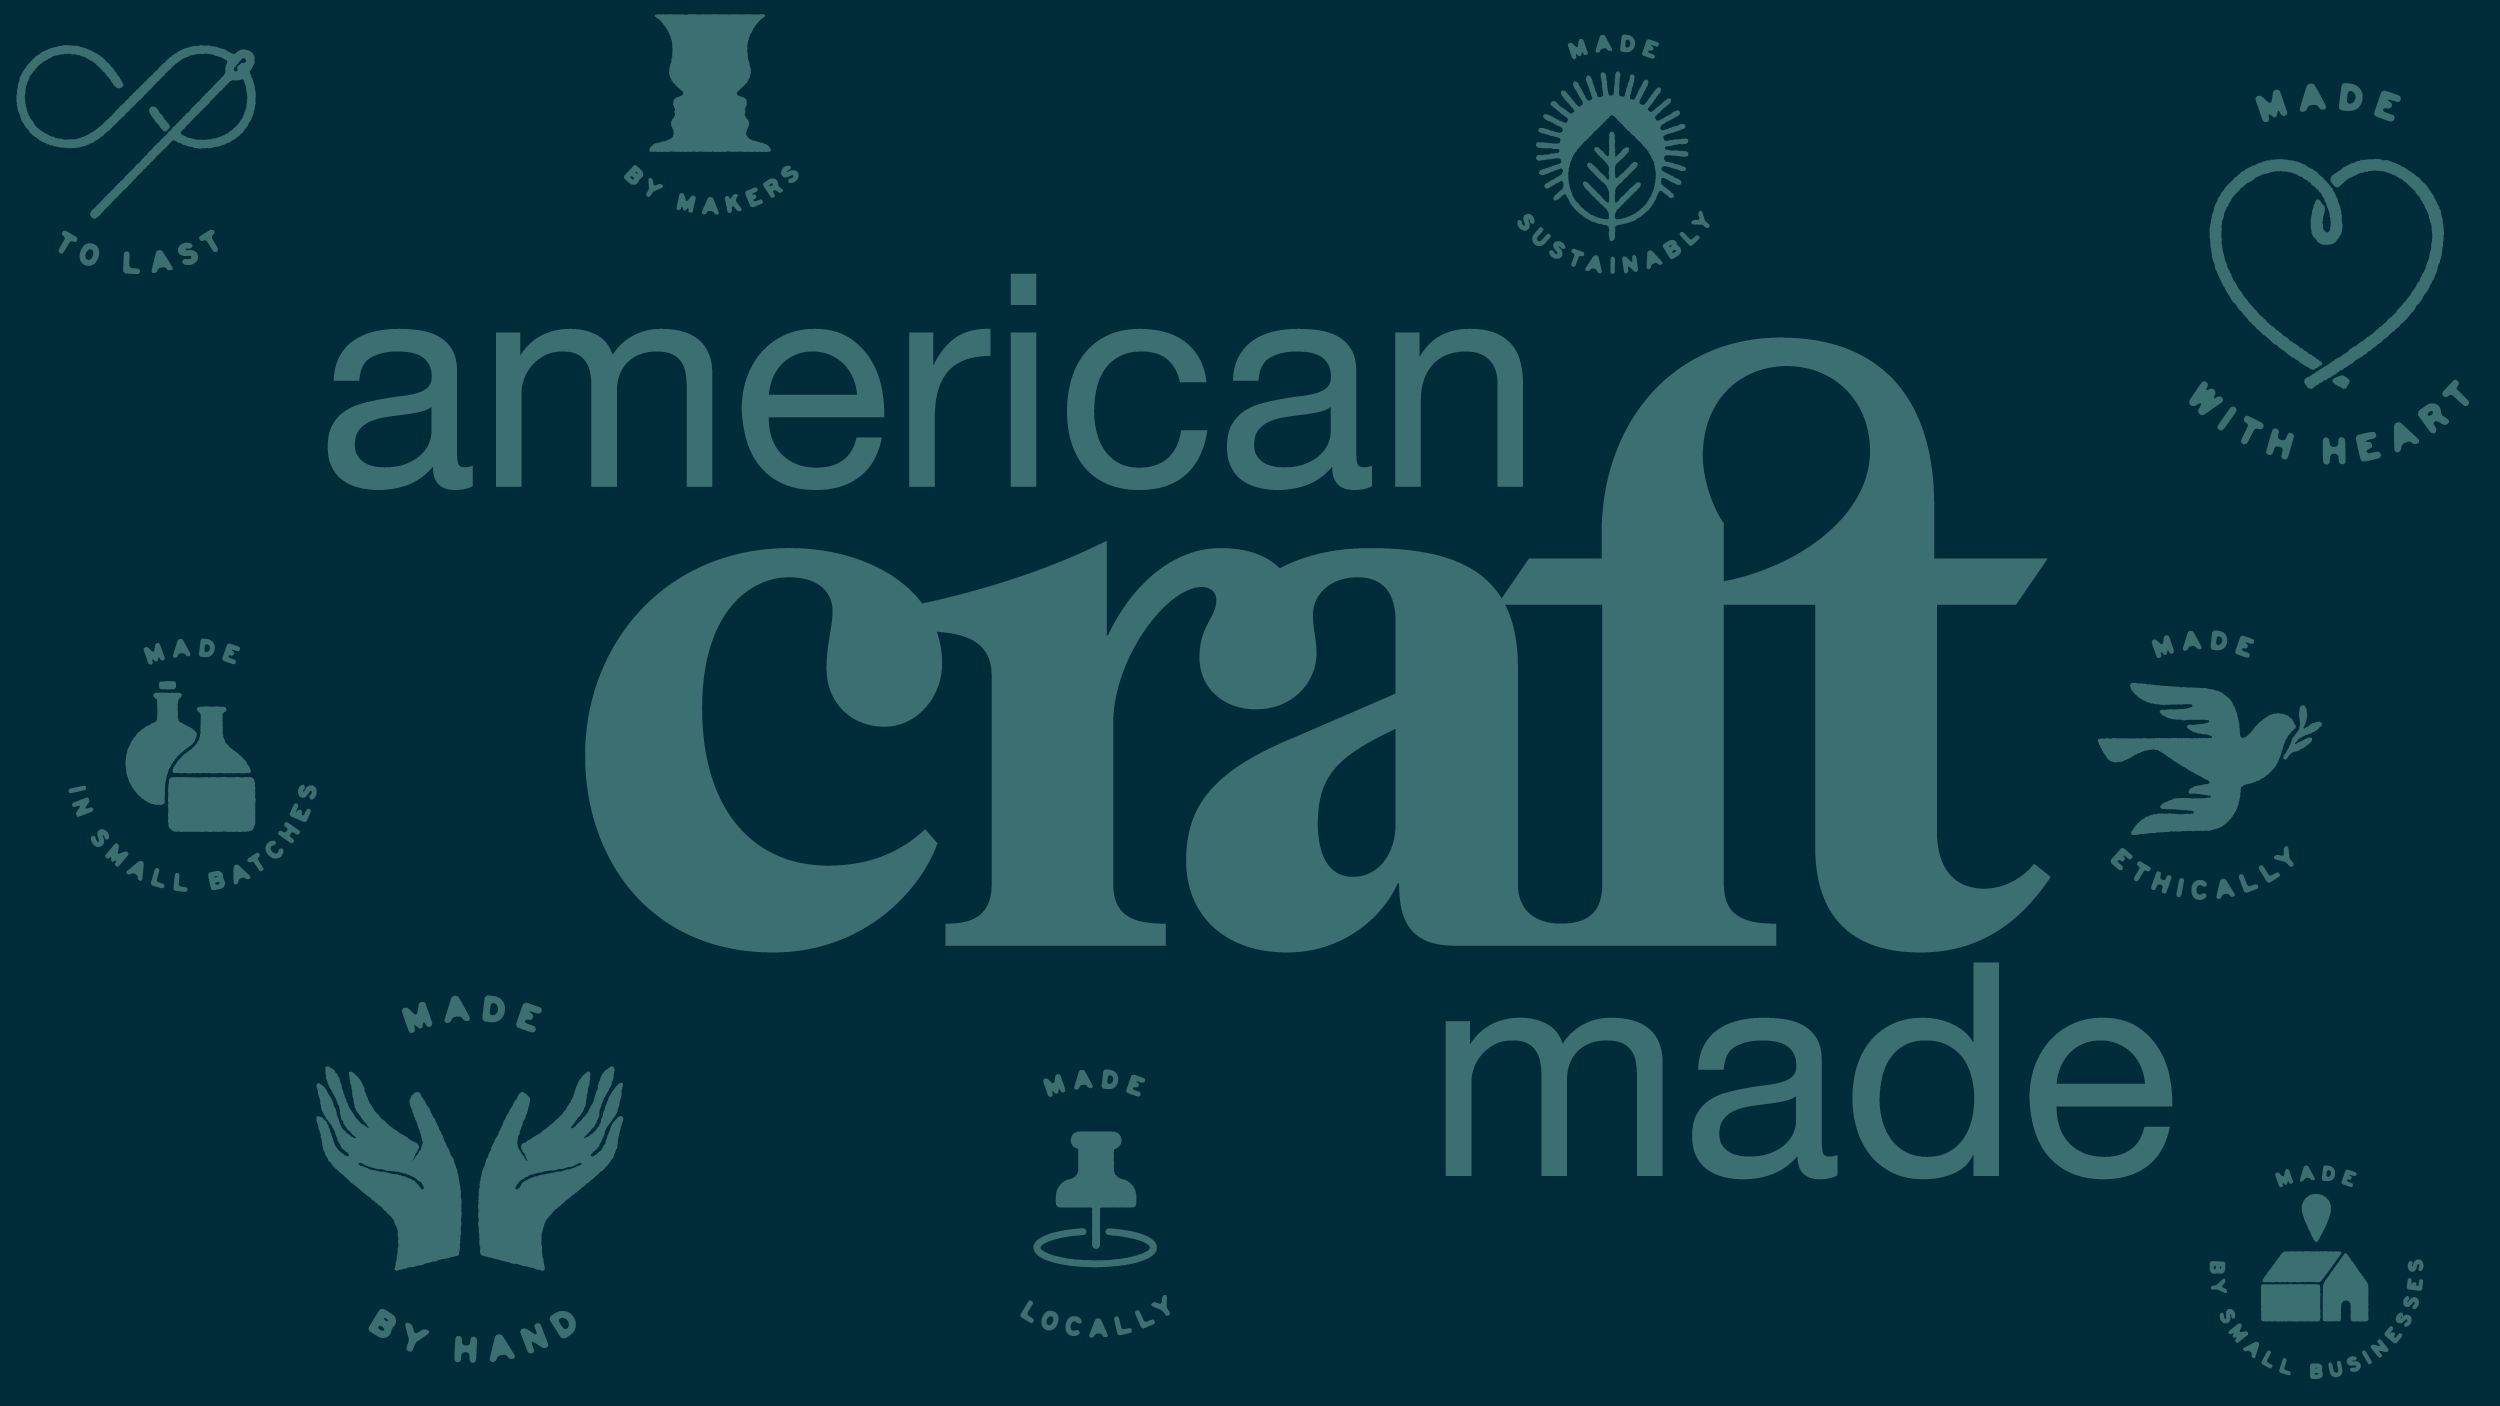 American Craft Made Baltimore 2023 all craft artists are encouraged to apply application deadline july 15 2022 in-person dates march 3-5 2023